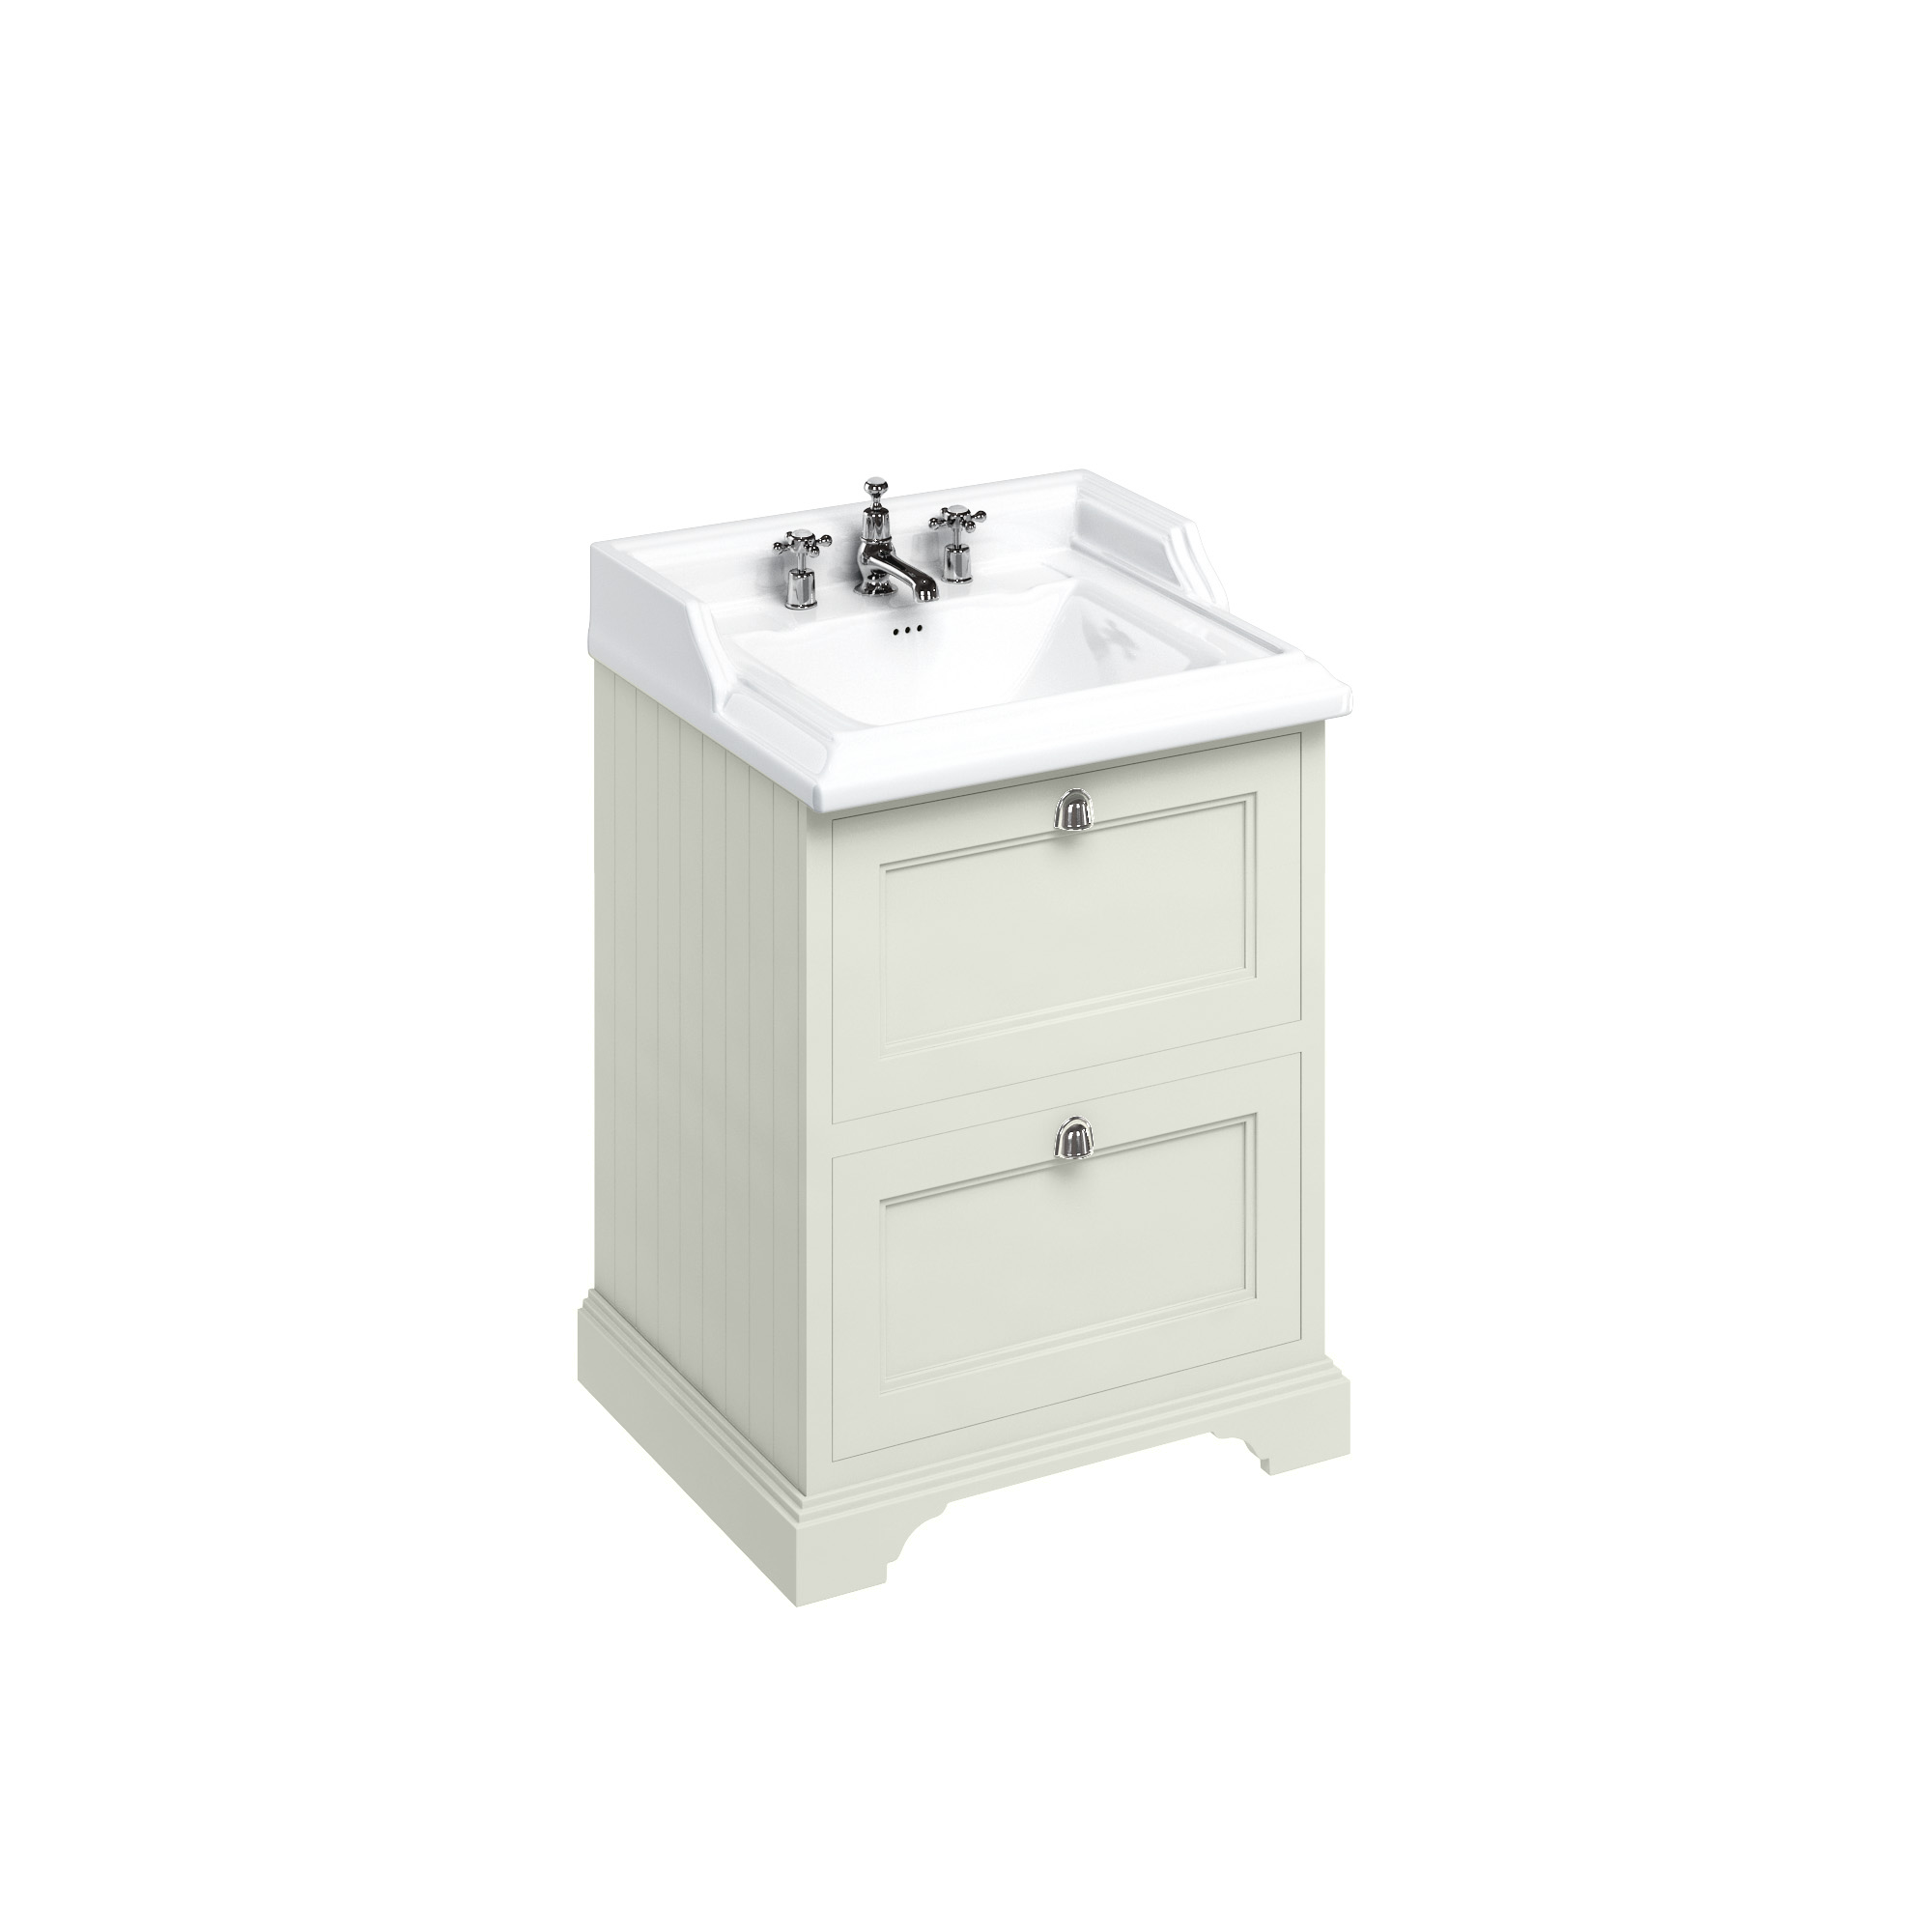 Freestanding 65 Vanity Unit with 2 drawers - Sand and Classic basin 3 tap holes